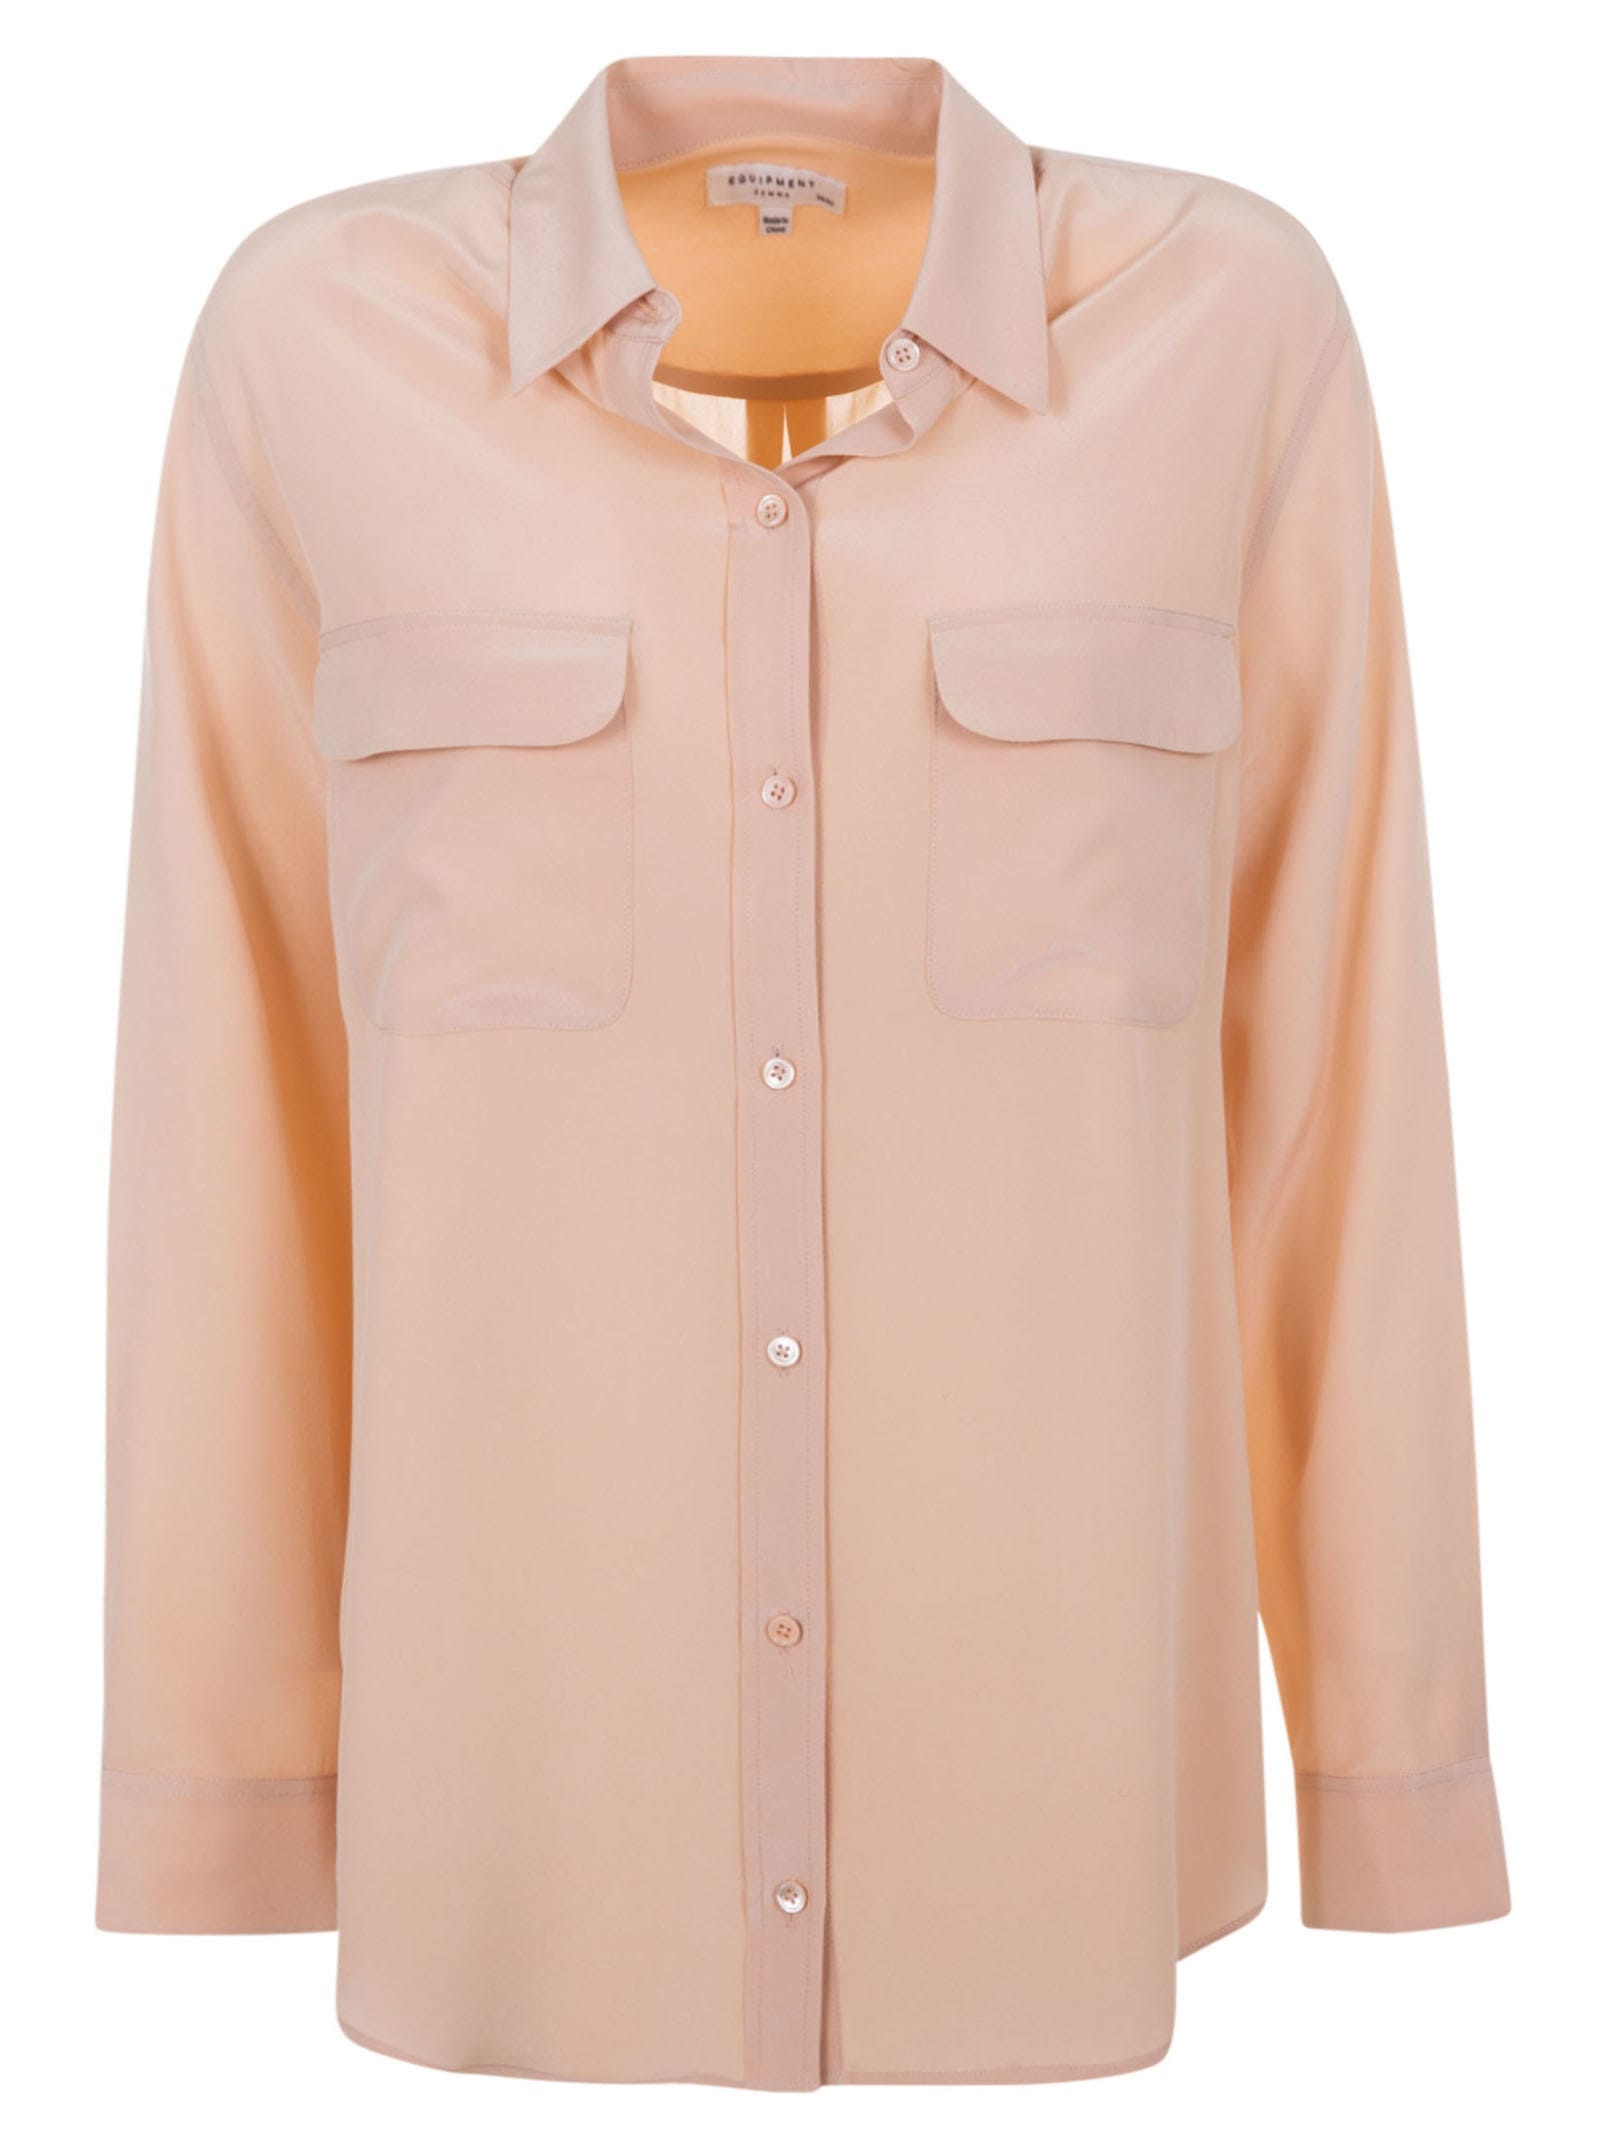 EQUIPMENT SIGNATURE LONG SLEEVED SHIRT,Q23 E035 FRENCH NUDE